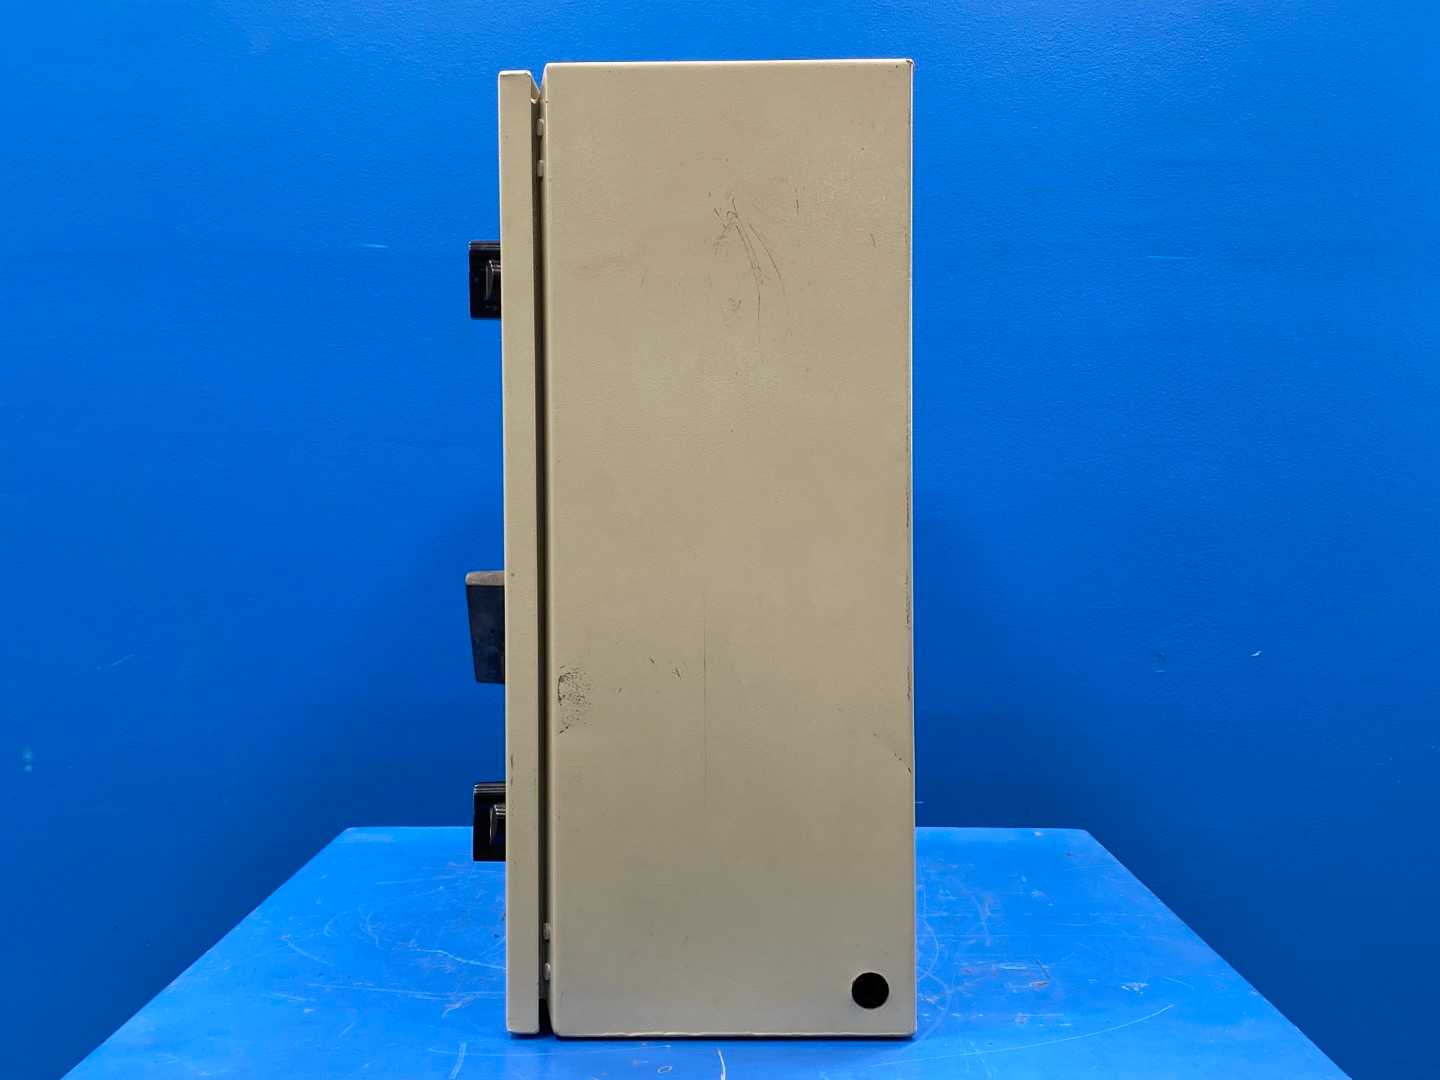 Electrical Enclosure 24"x24"x10" with Emergency Stop